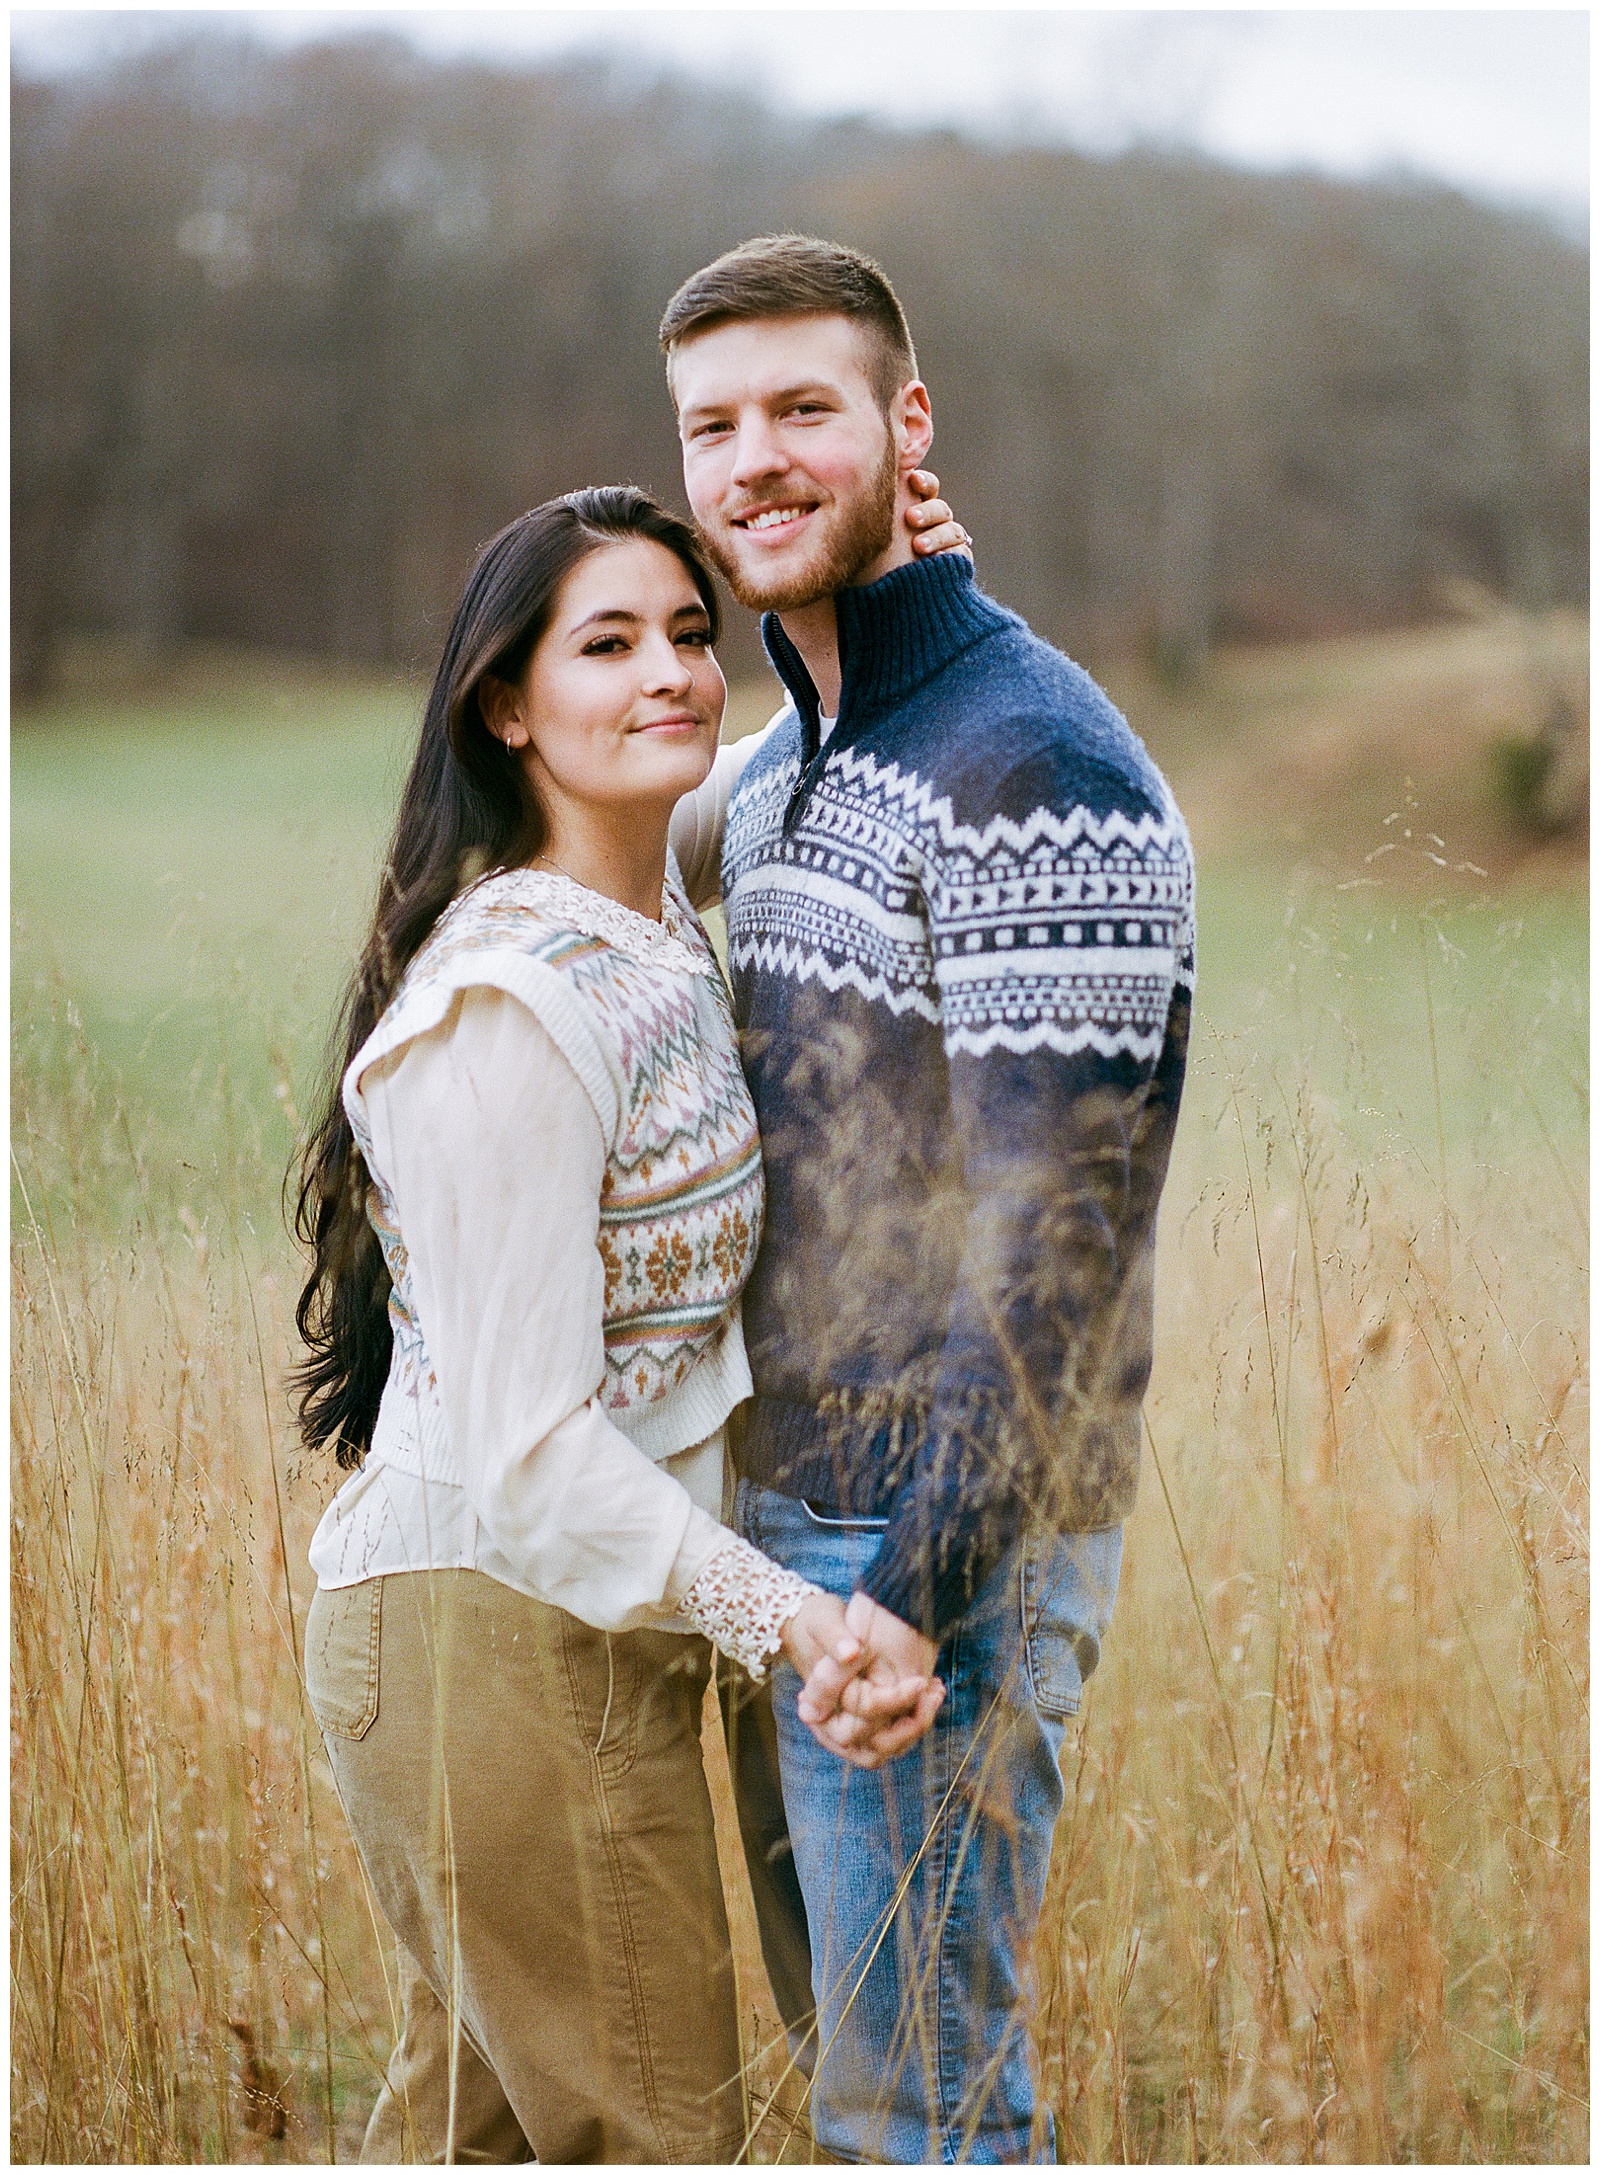 Engaged man and woman snuggled up in meadow at sunset in sweaters for their winter engagement session.